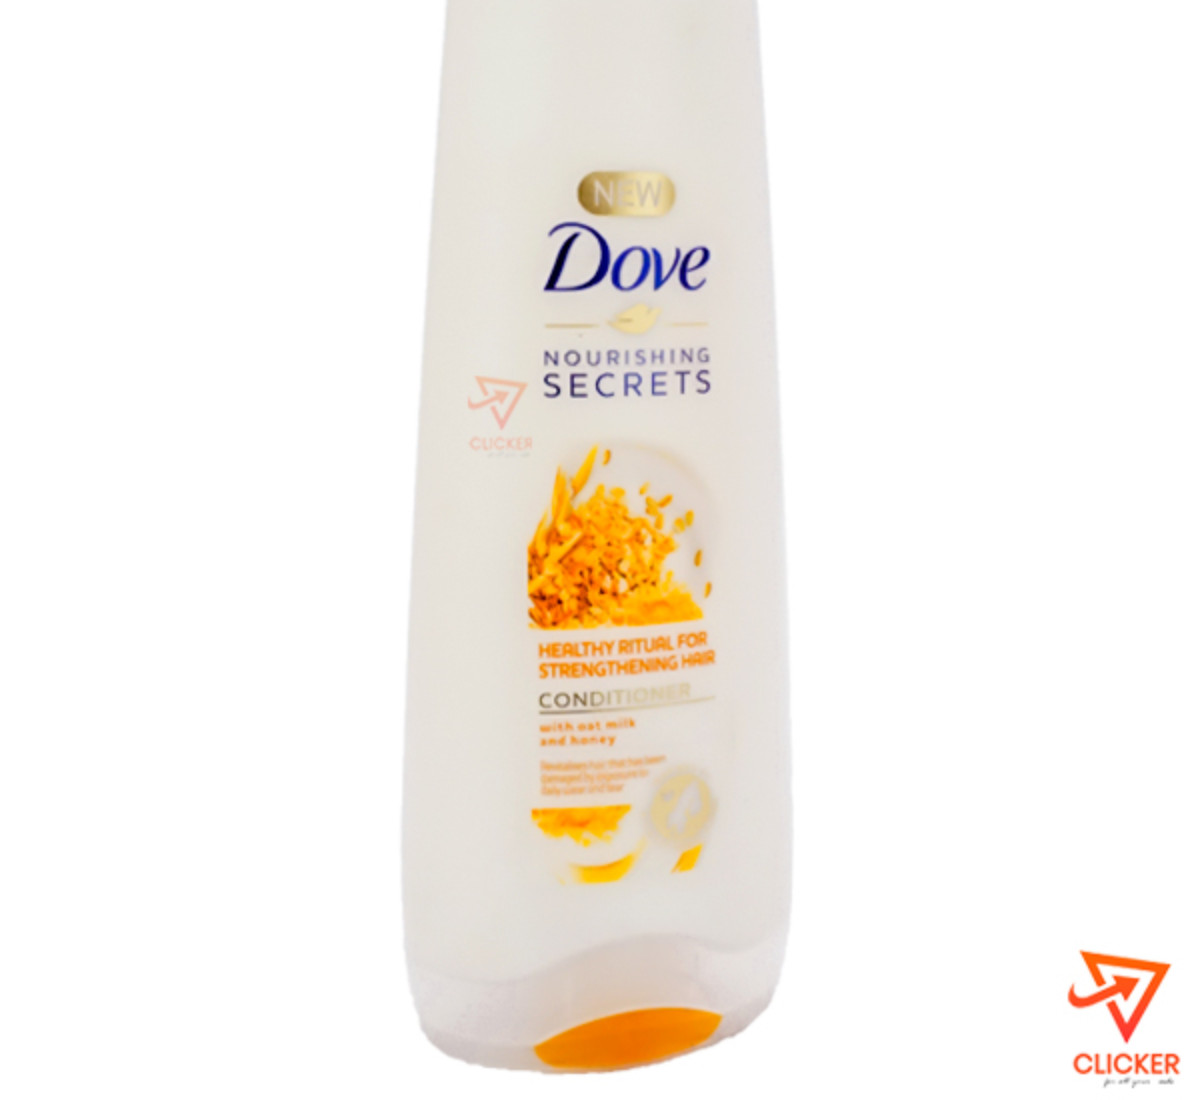 Clicker product 180ml Dove Nourishing secrets Healthy ritual for strengthening hair conditioner 1108